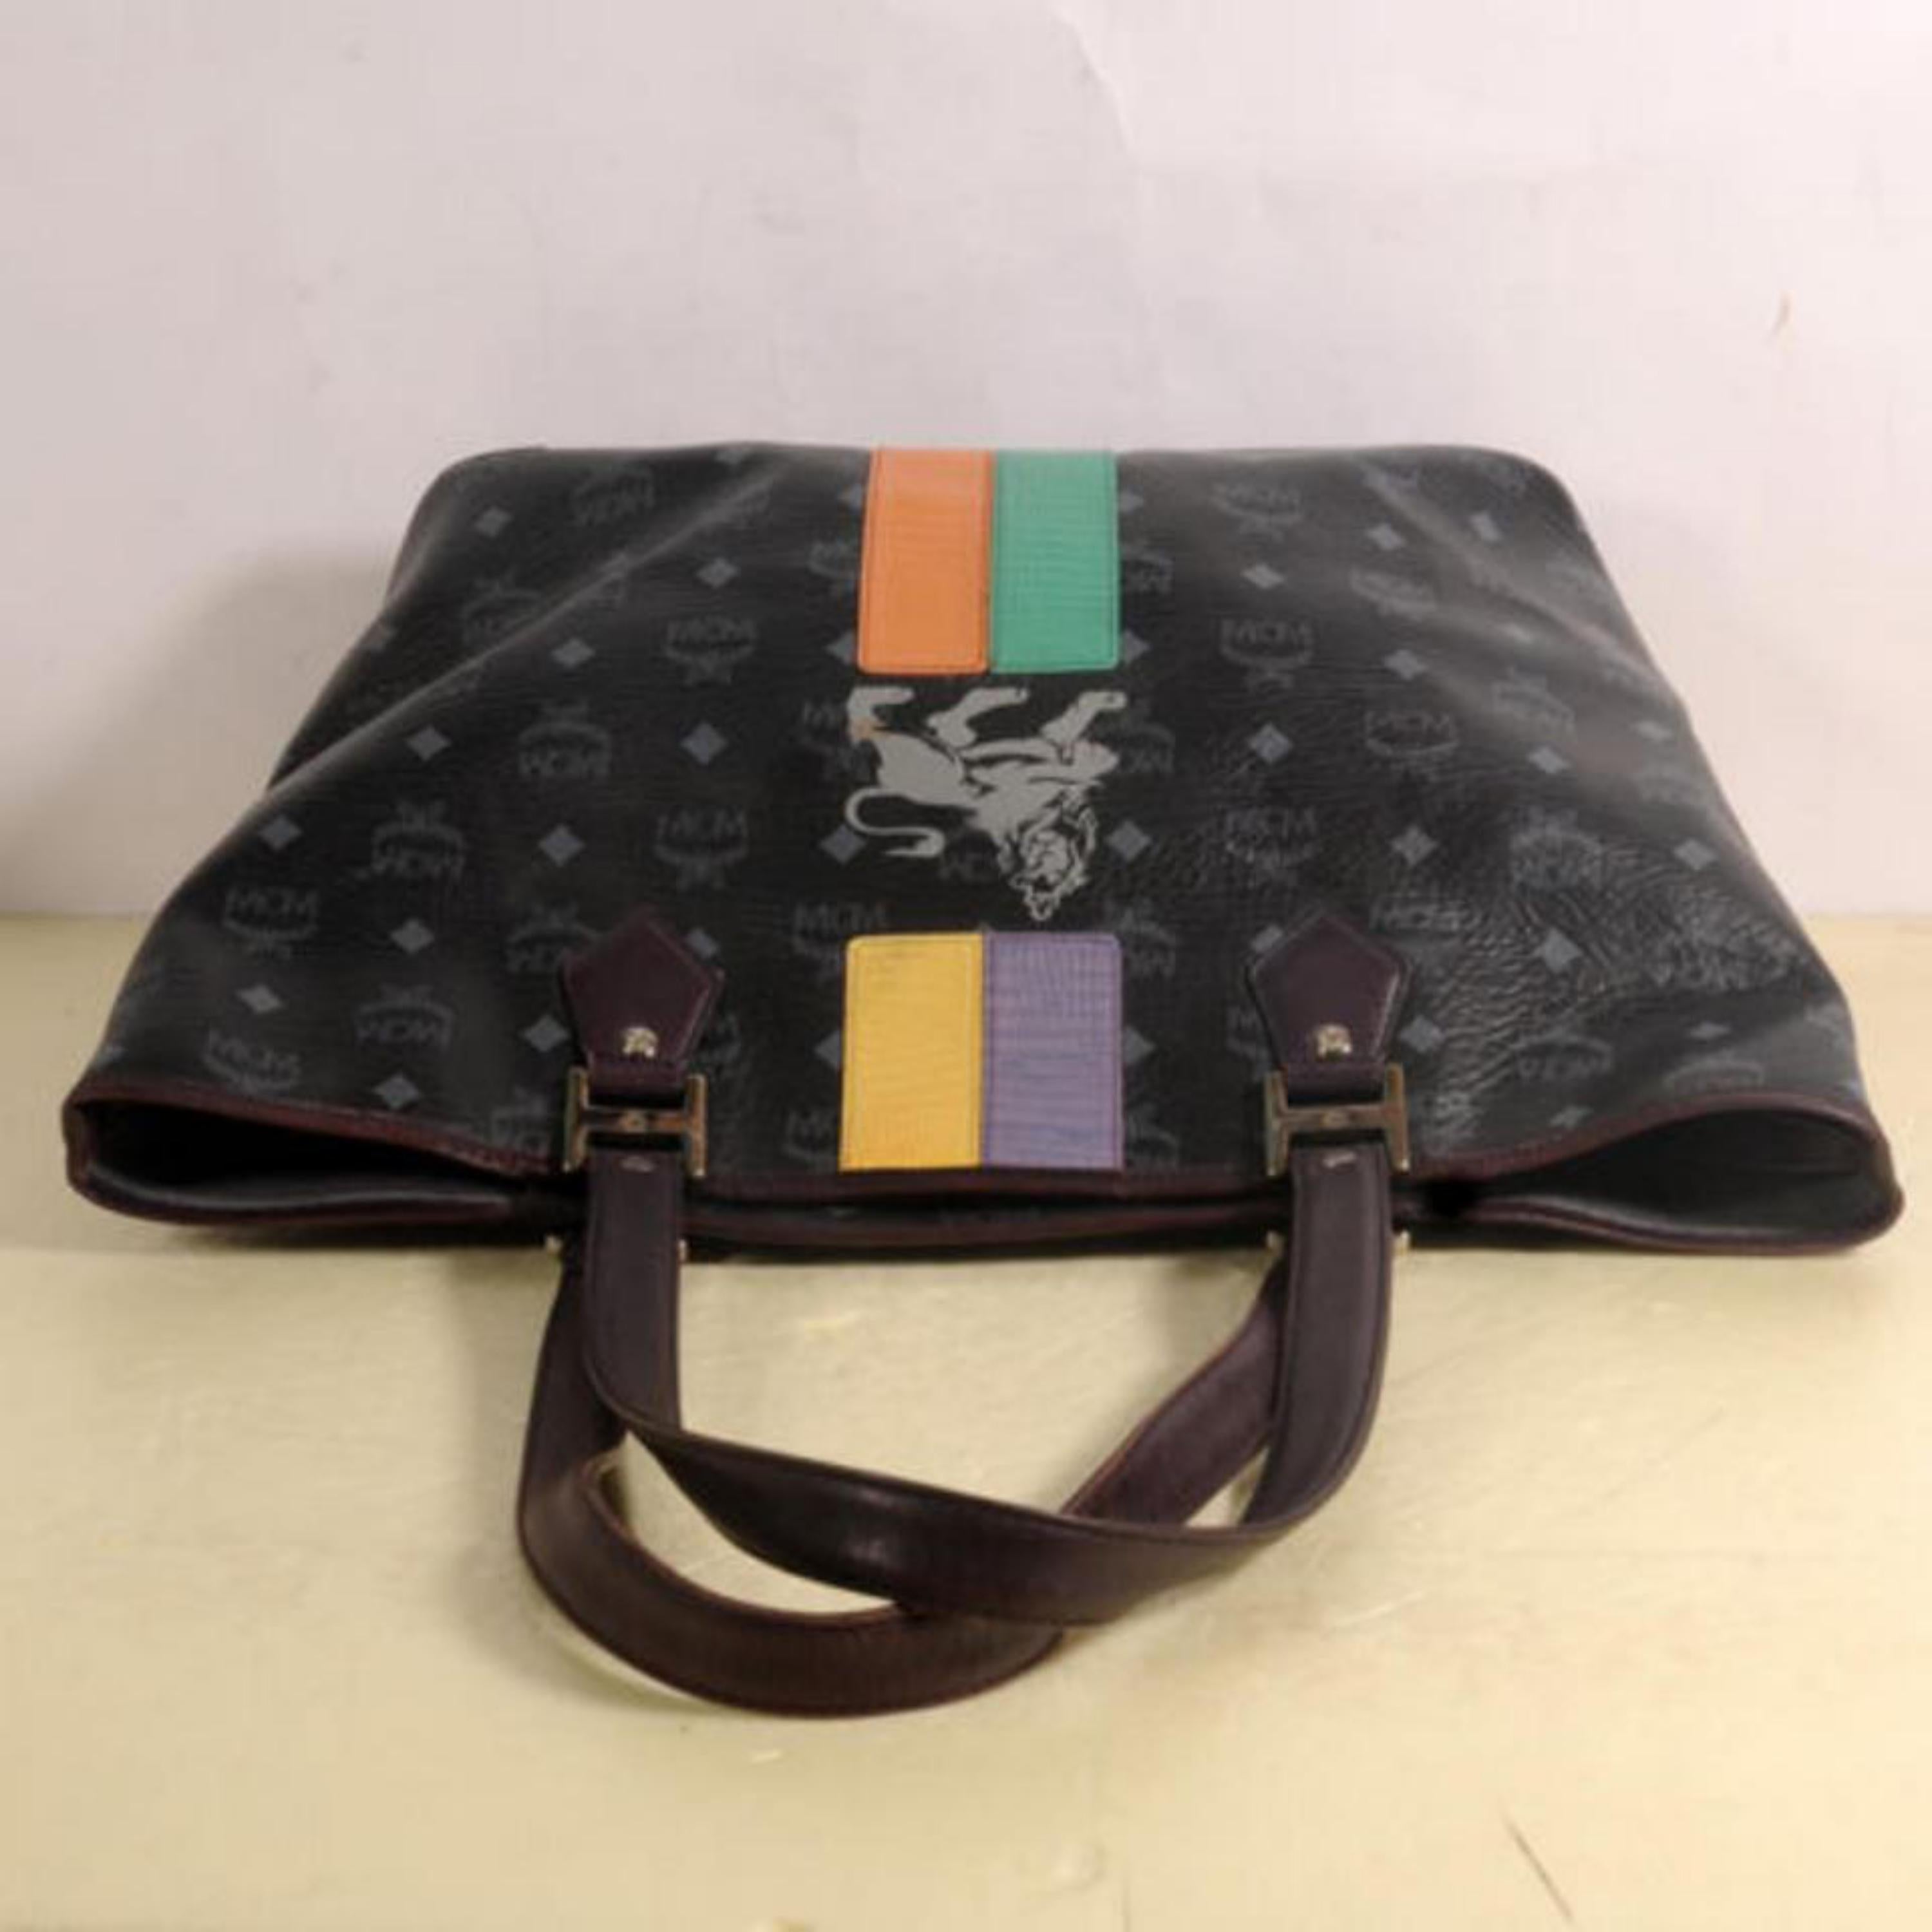 This item will ship out immediately.
Previously owned, unless otherwise stated.
VERY GOOD VINTAGE CONDITION
(7.5/10 or B+)
Includes Dust Bag
This item does not come with any extra accessories.
Please review photos for more details.
Color appearance